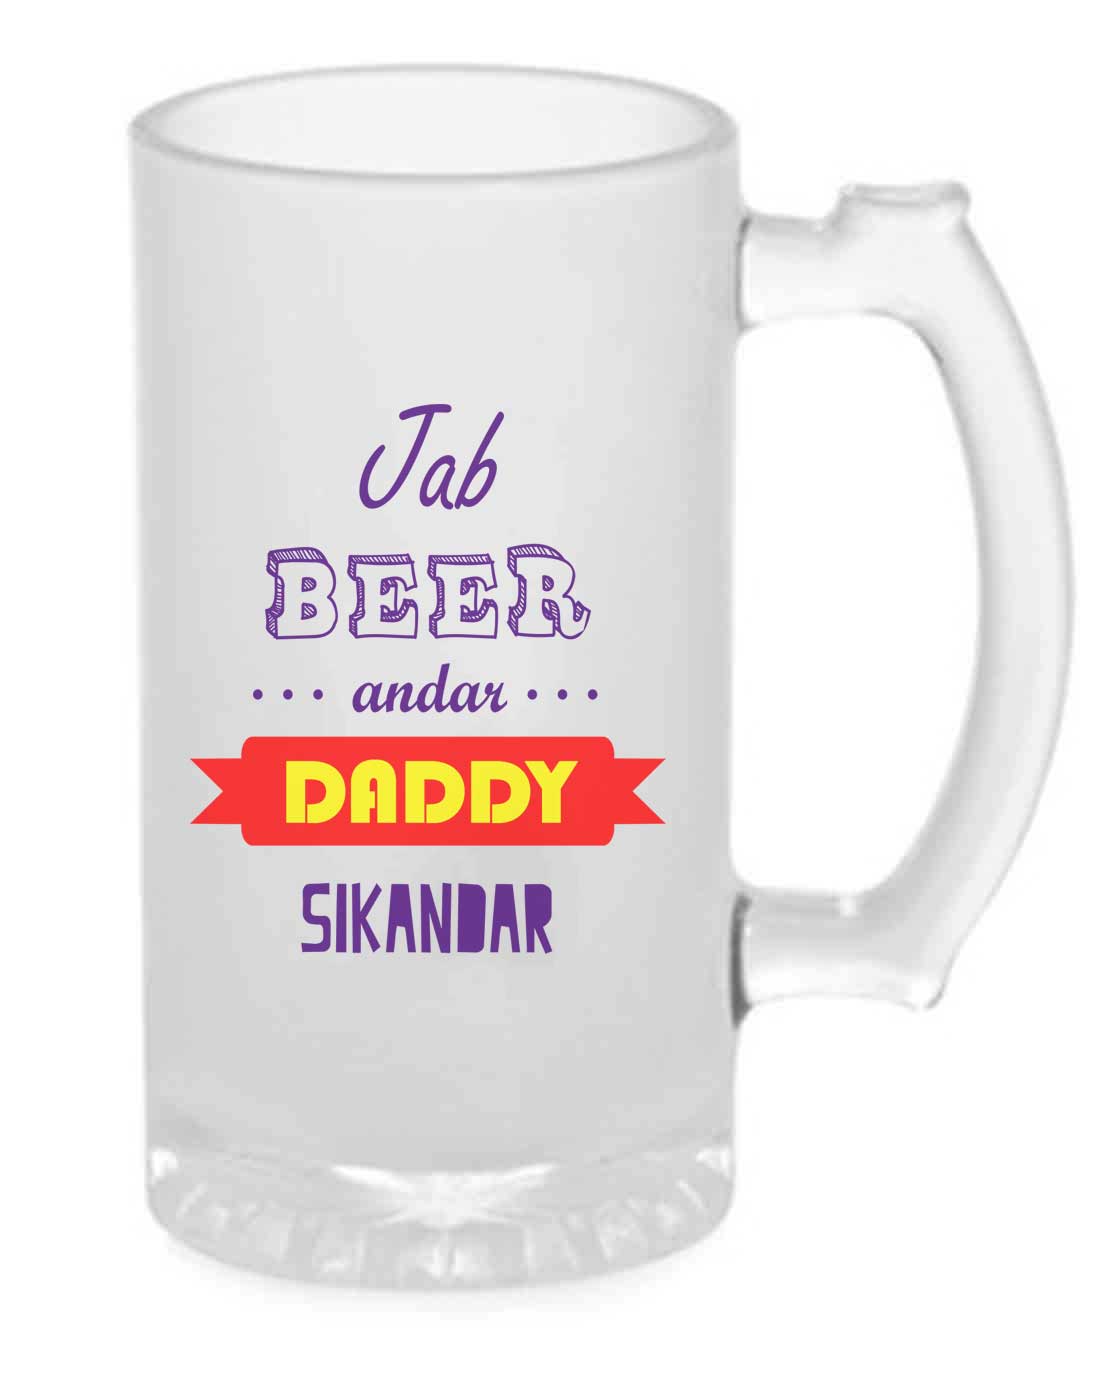 Funny Beer Mug Glass Ideal Gifts for Dad Birthday - Daddy